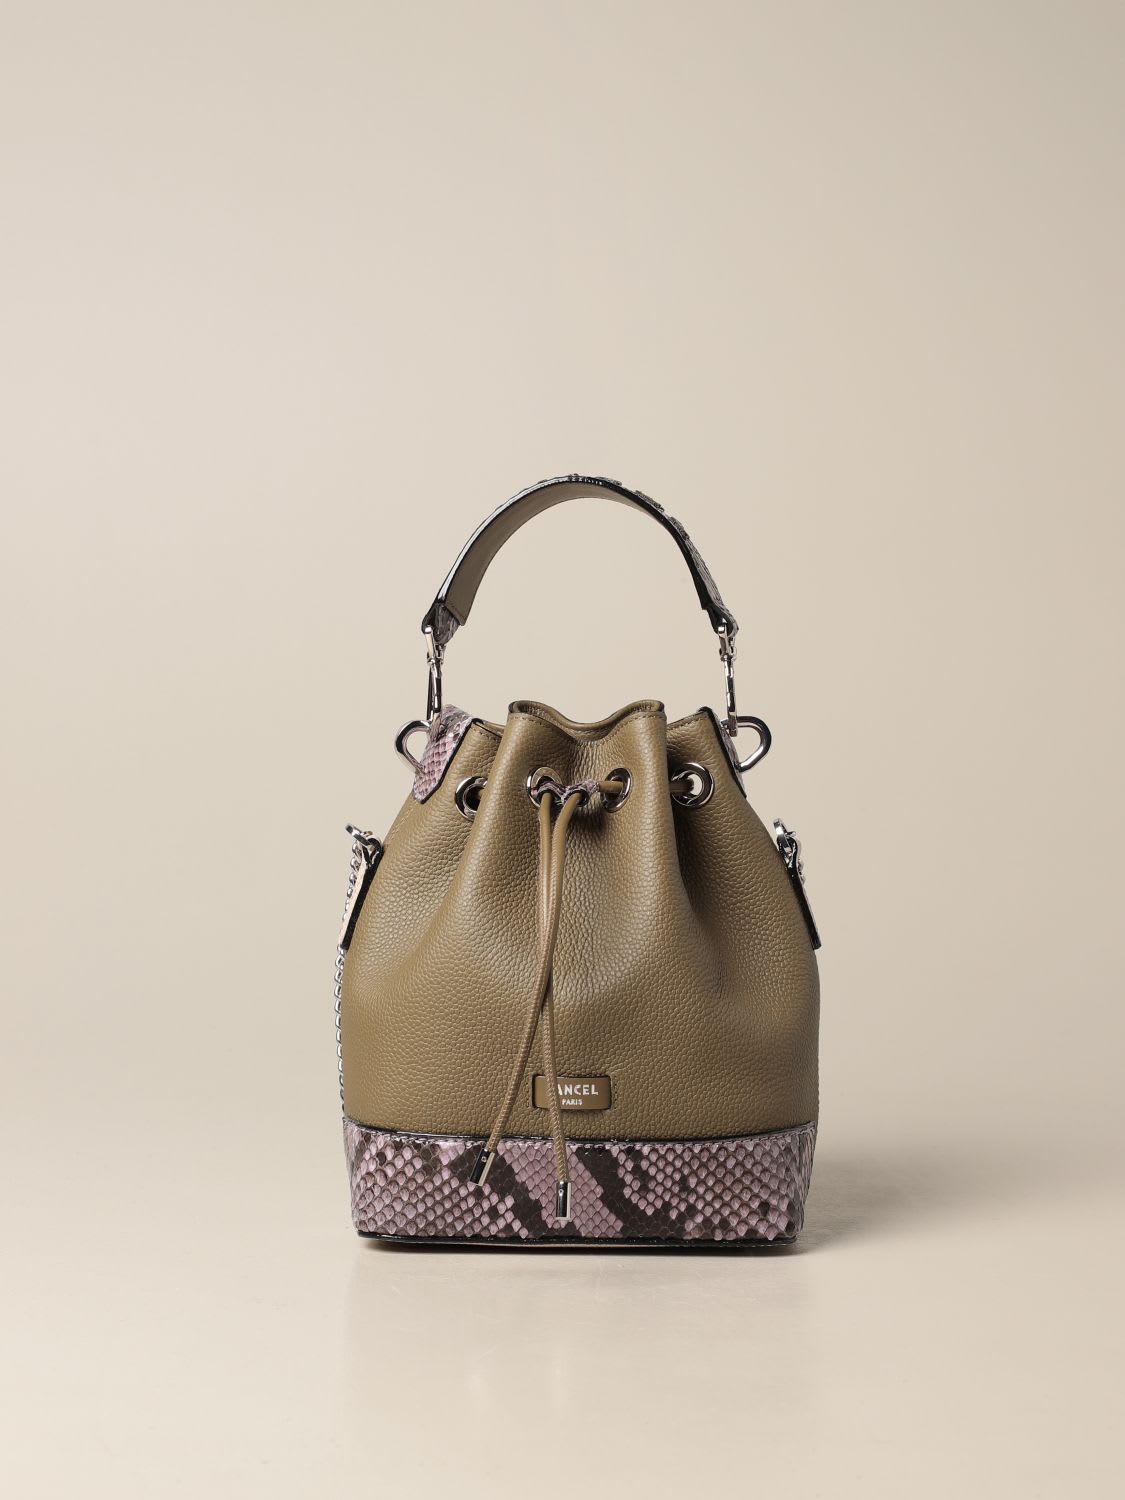 Lancel Bucket Bag In Hammered Leather And Python Leather In Kaki